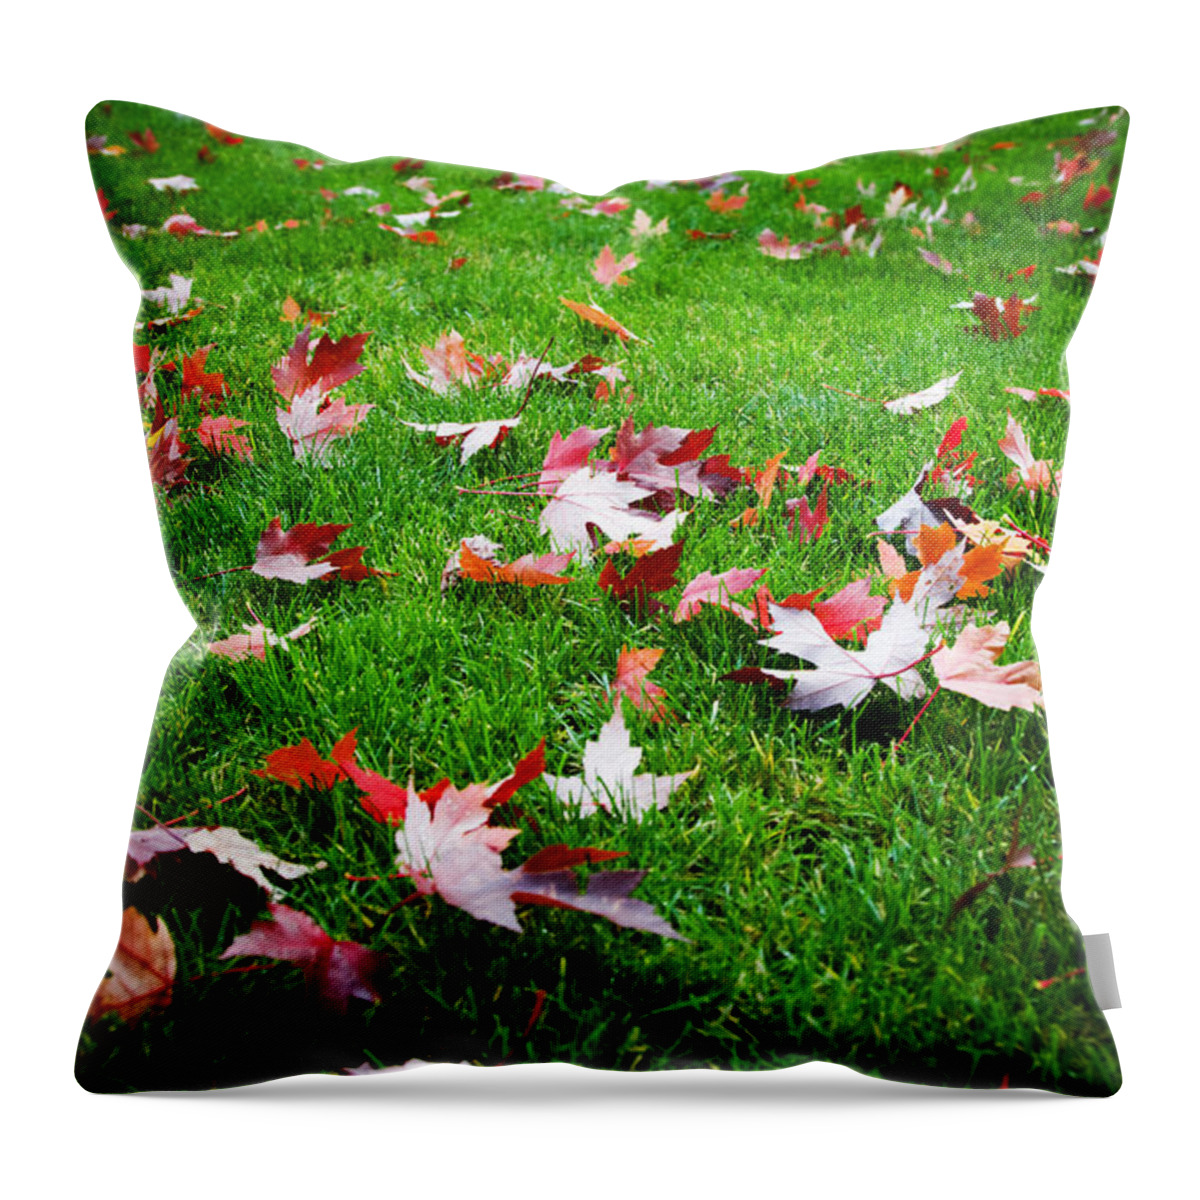 Orange Color Throw Pillow featuring the photograph Leafy Lawn by Kativ